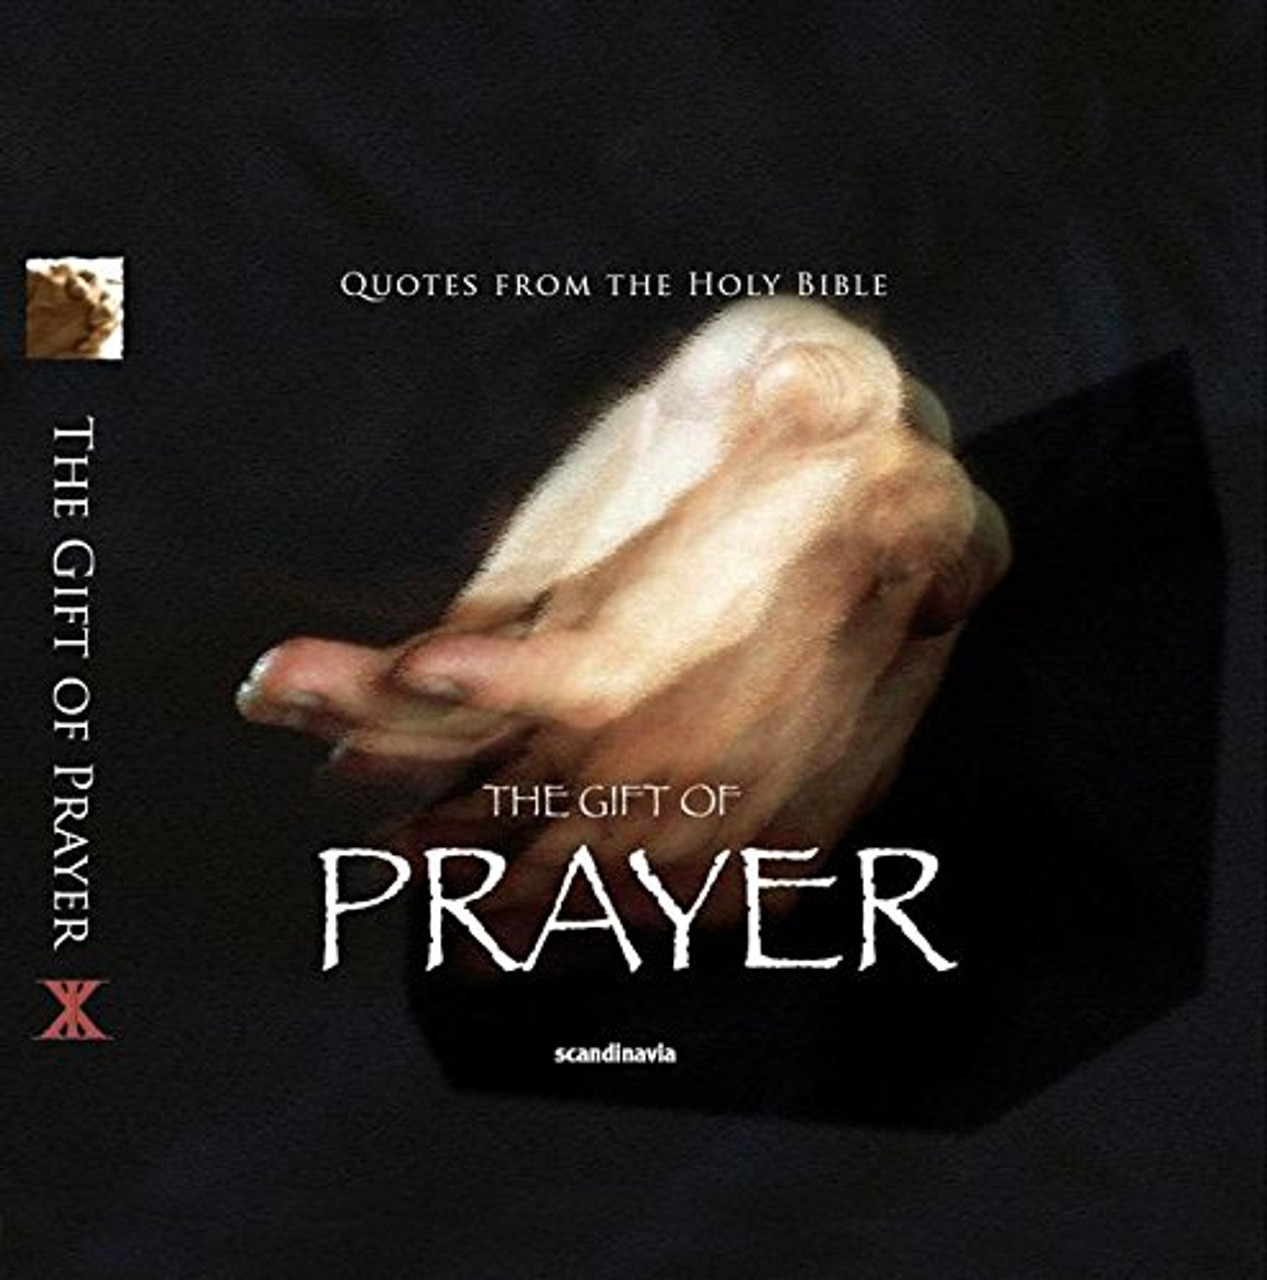 The Gift of Prayer (Quotes) (Gift Book)